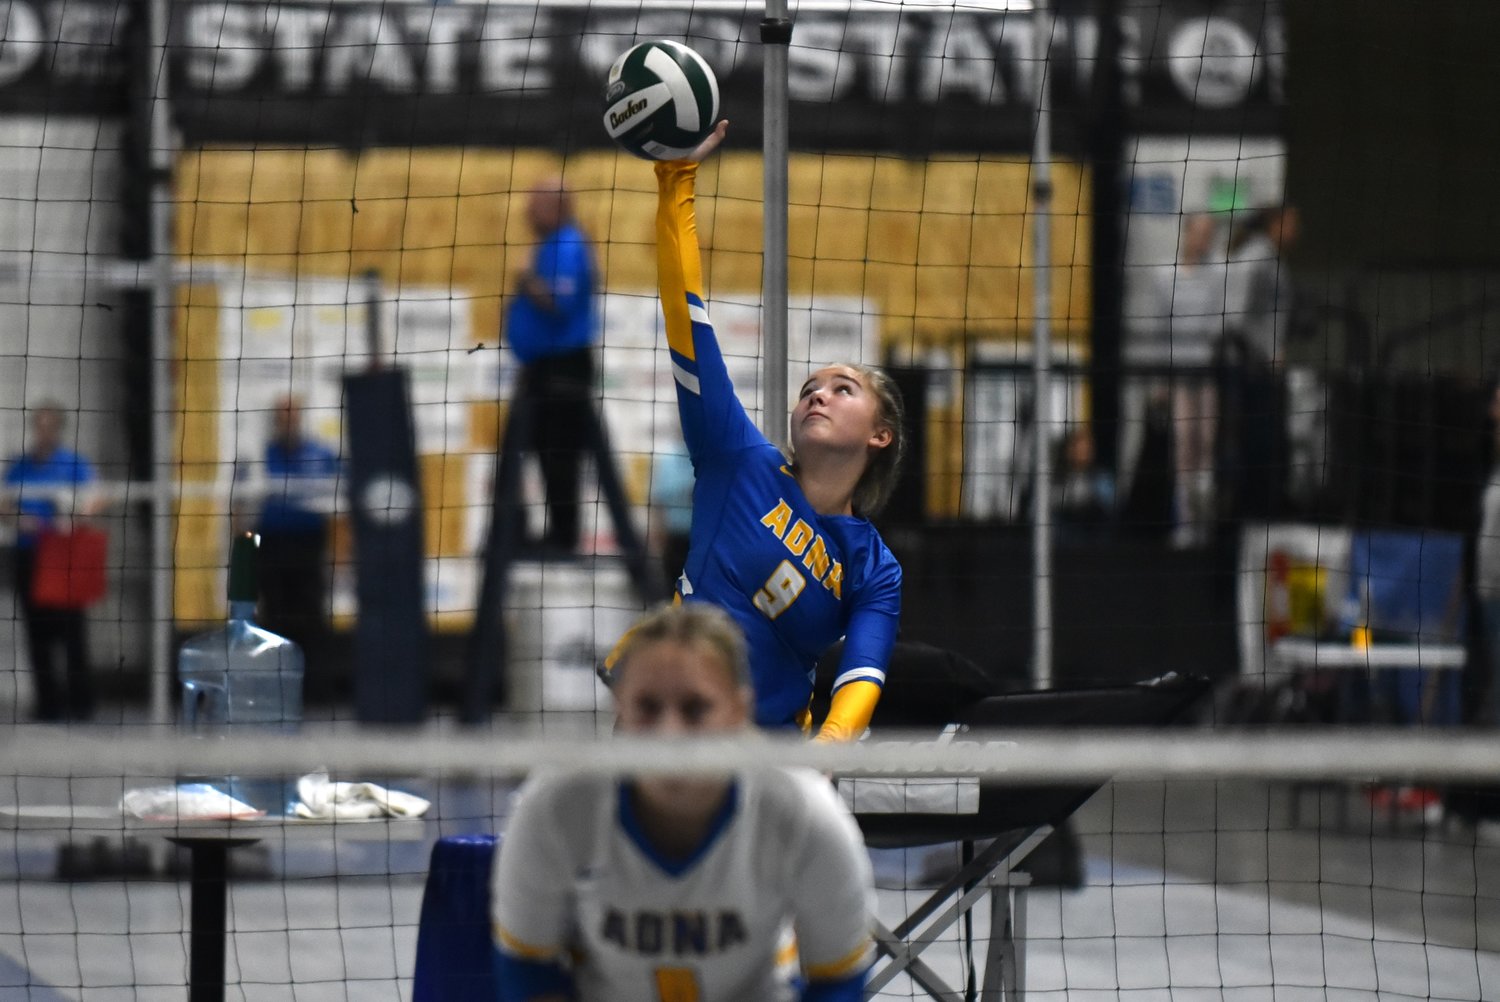 Danika Hallom serves it up during Adna's win over Toutle Lake in a loser-out match at the 2B state tournament in Yakima on Nov. 11.